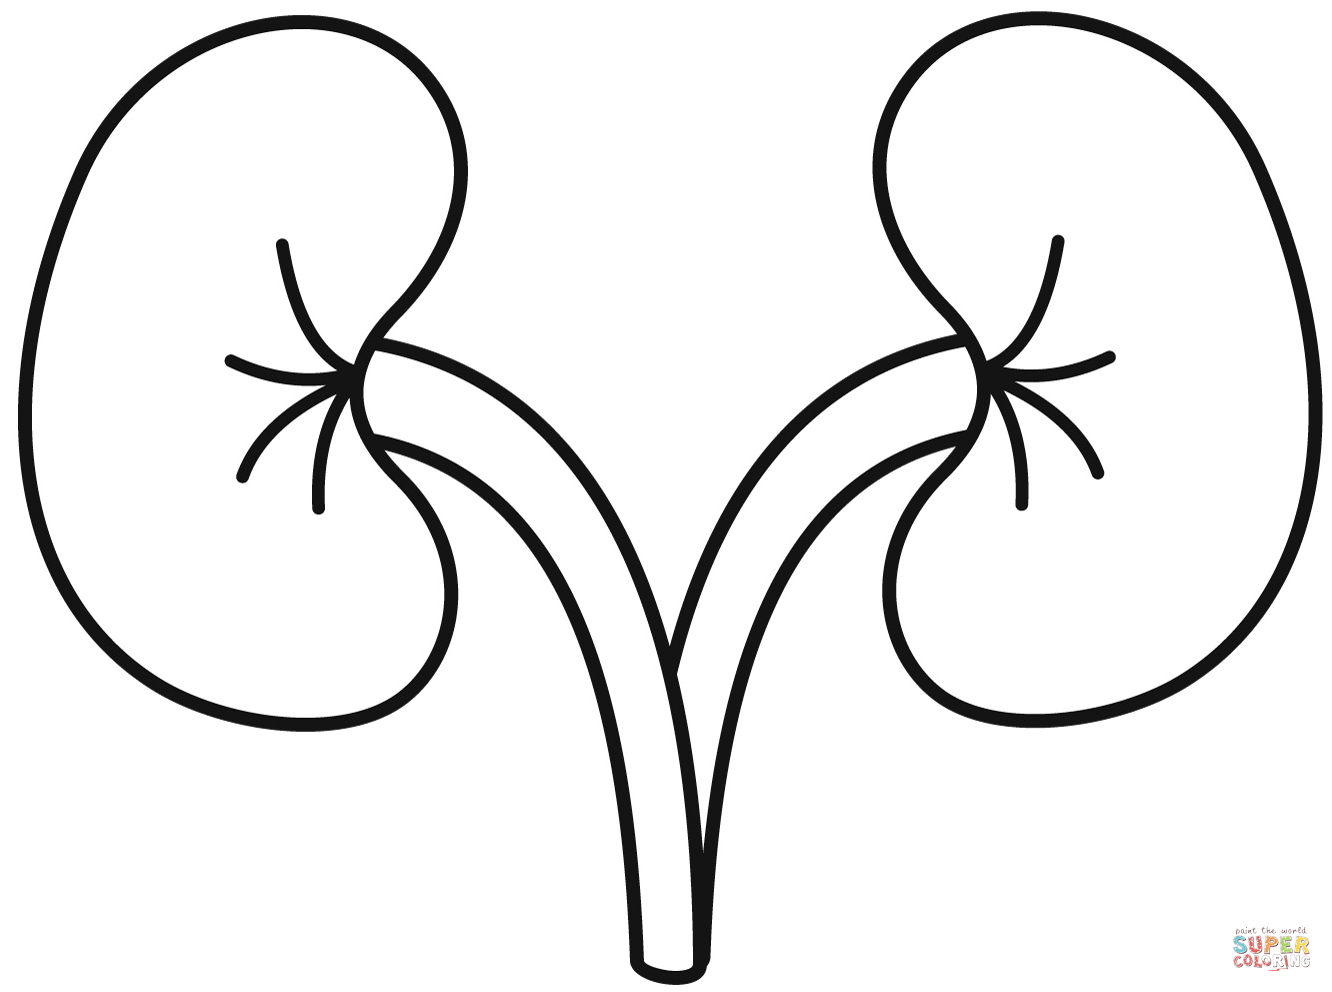 Kidney coloring page | Free Printable Coloring Pages